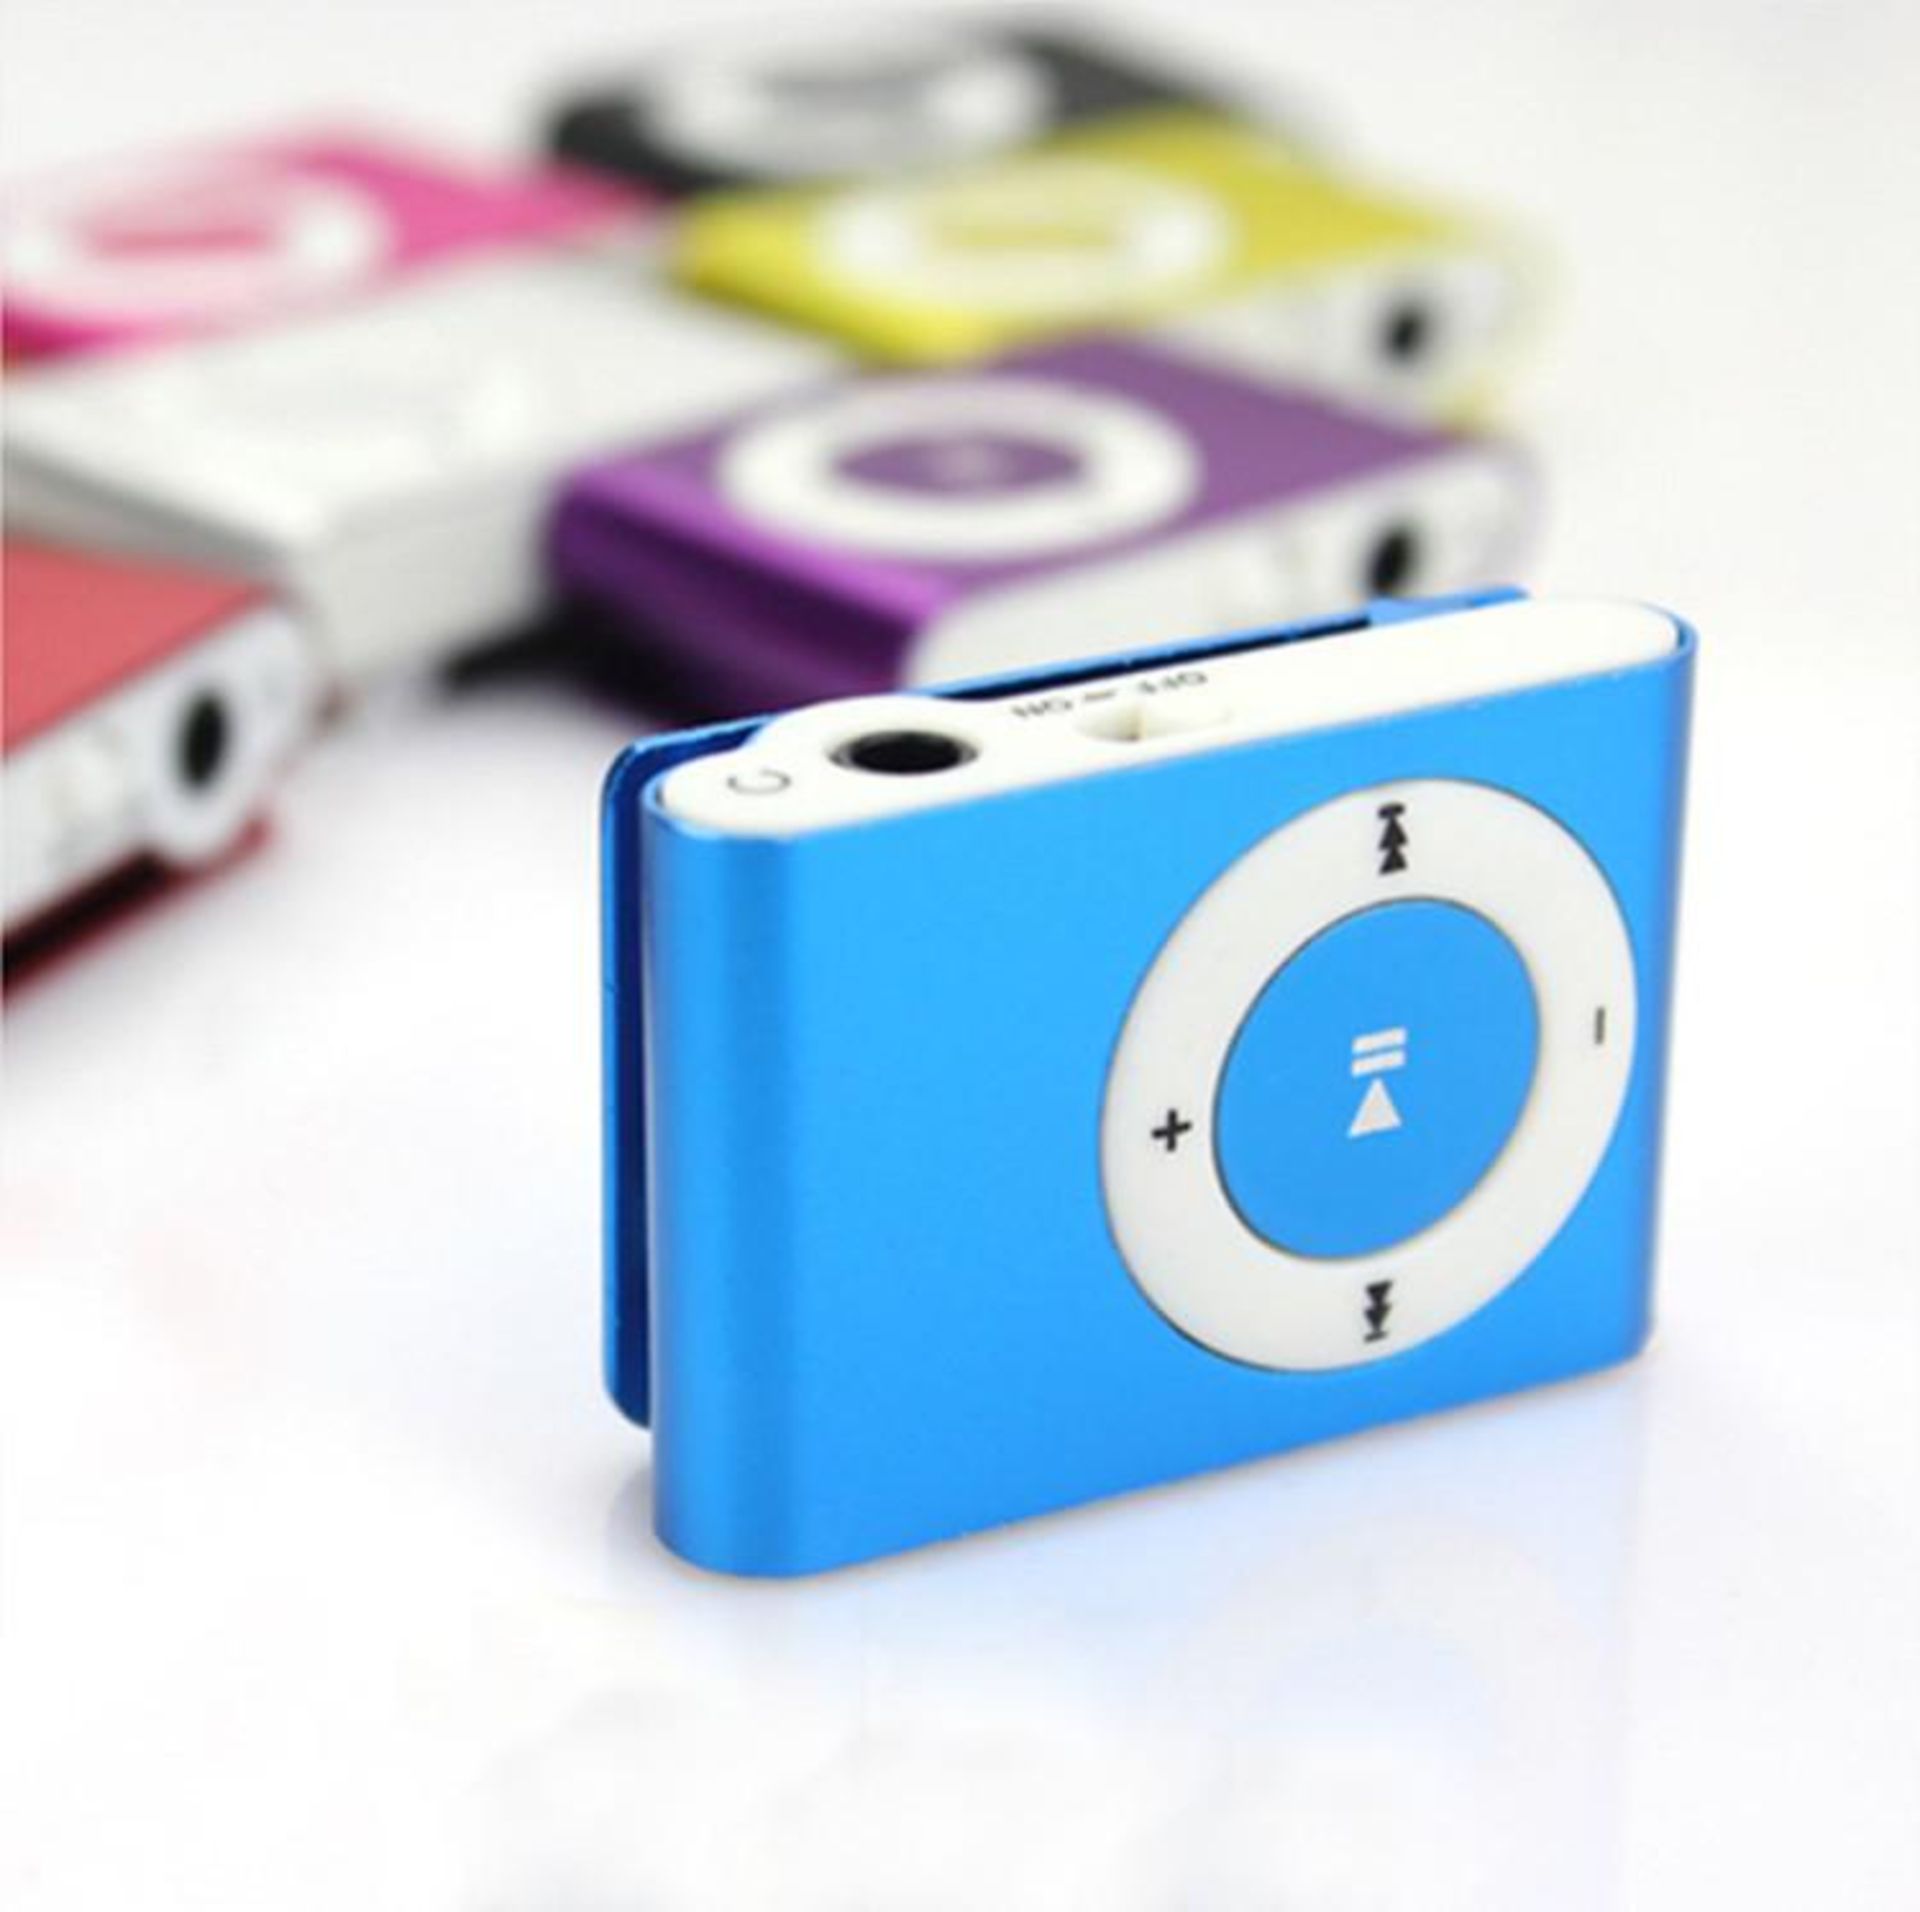 Brand New MP3 Player With Clip And Metal Construction - With USB Charging Cable And Earphones -